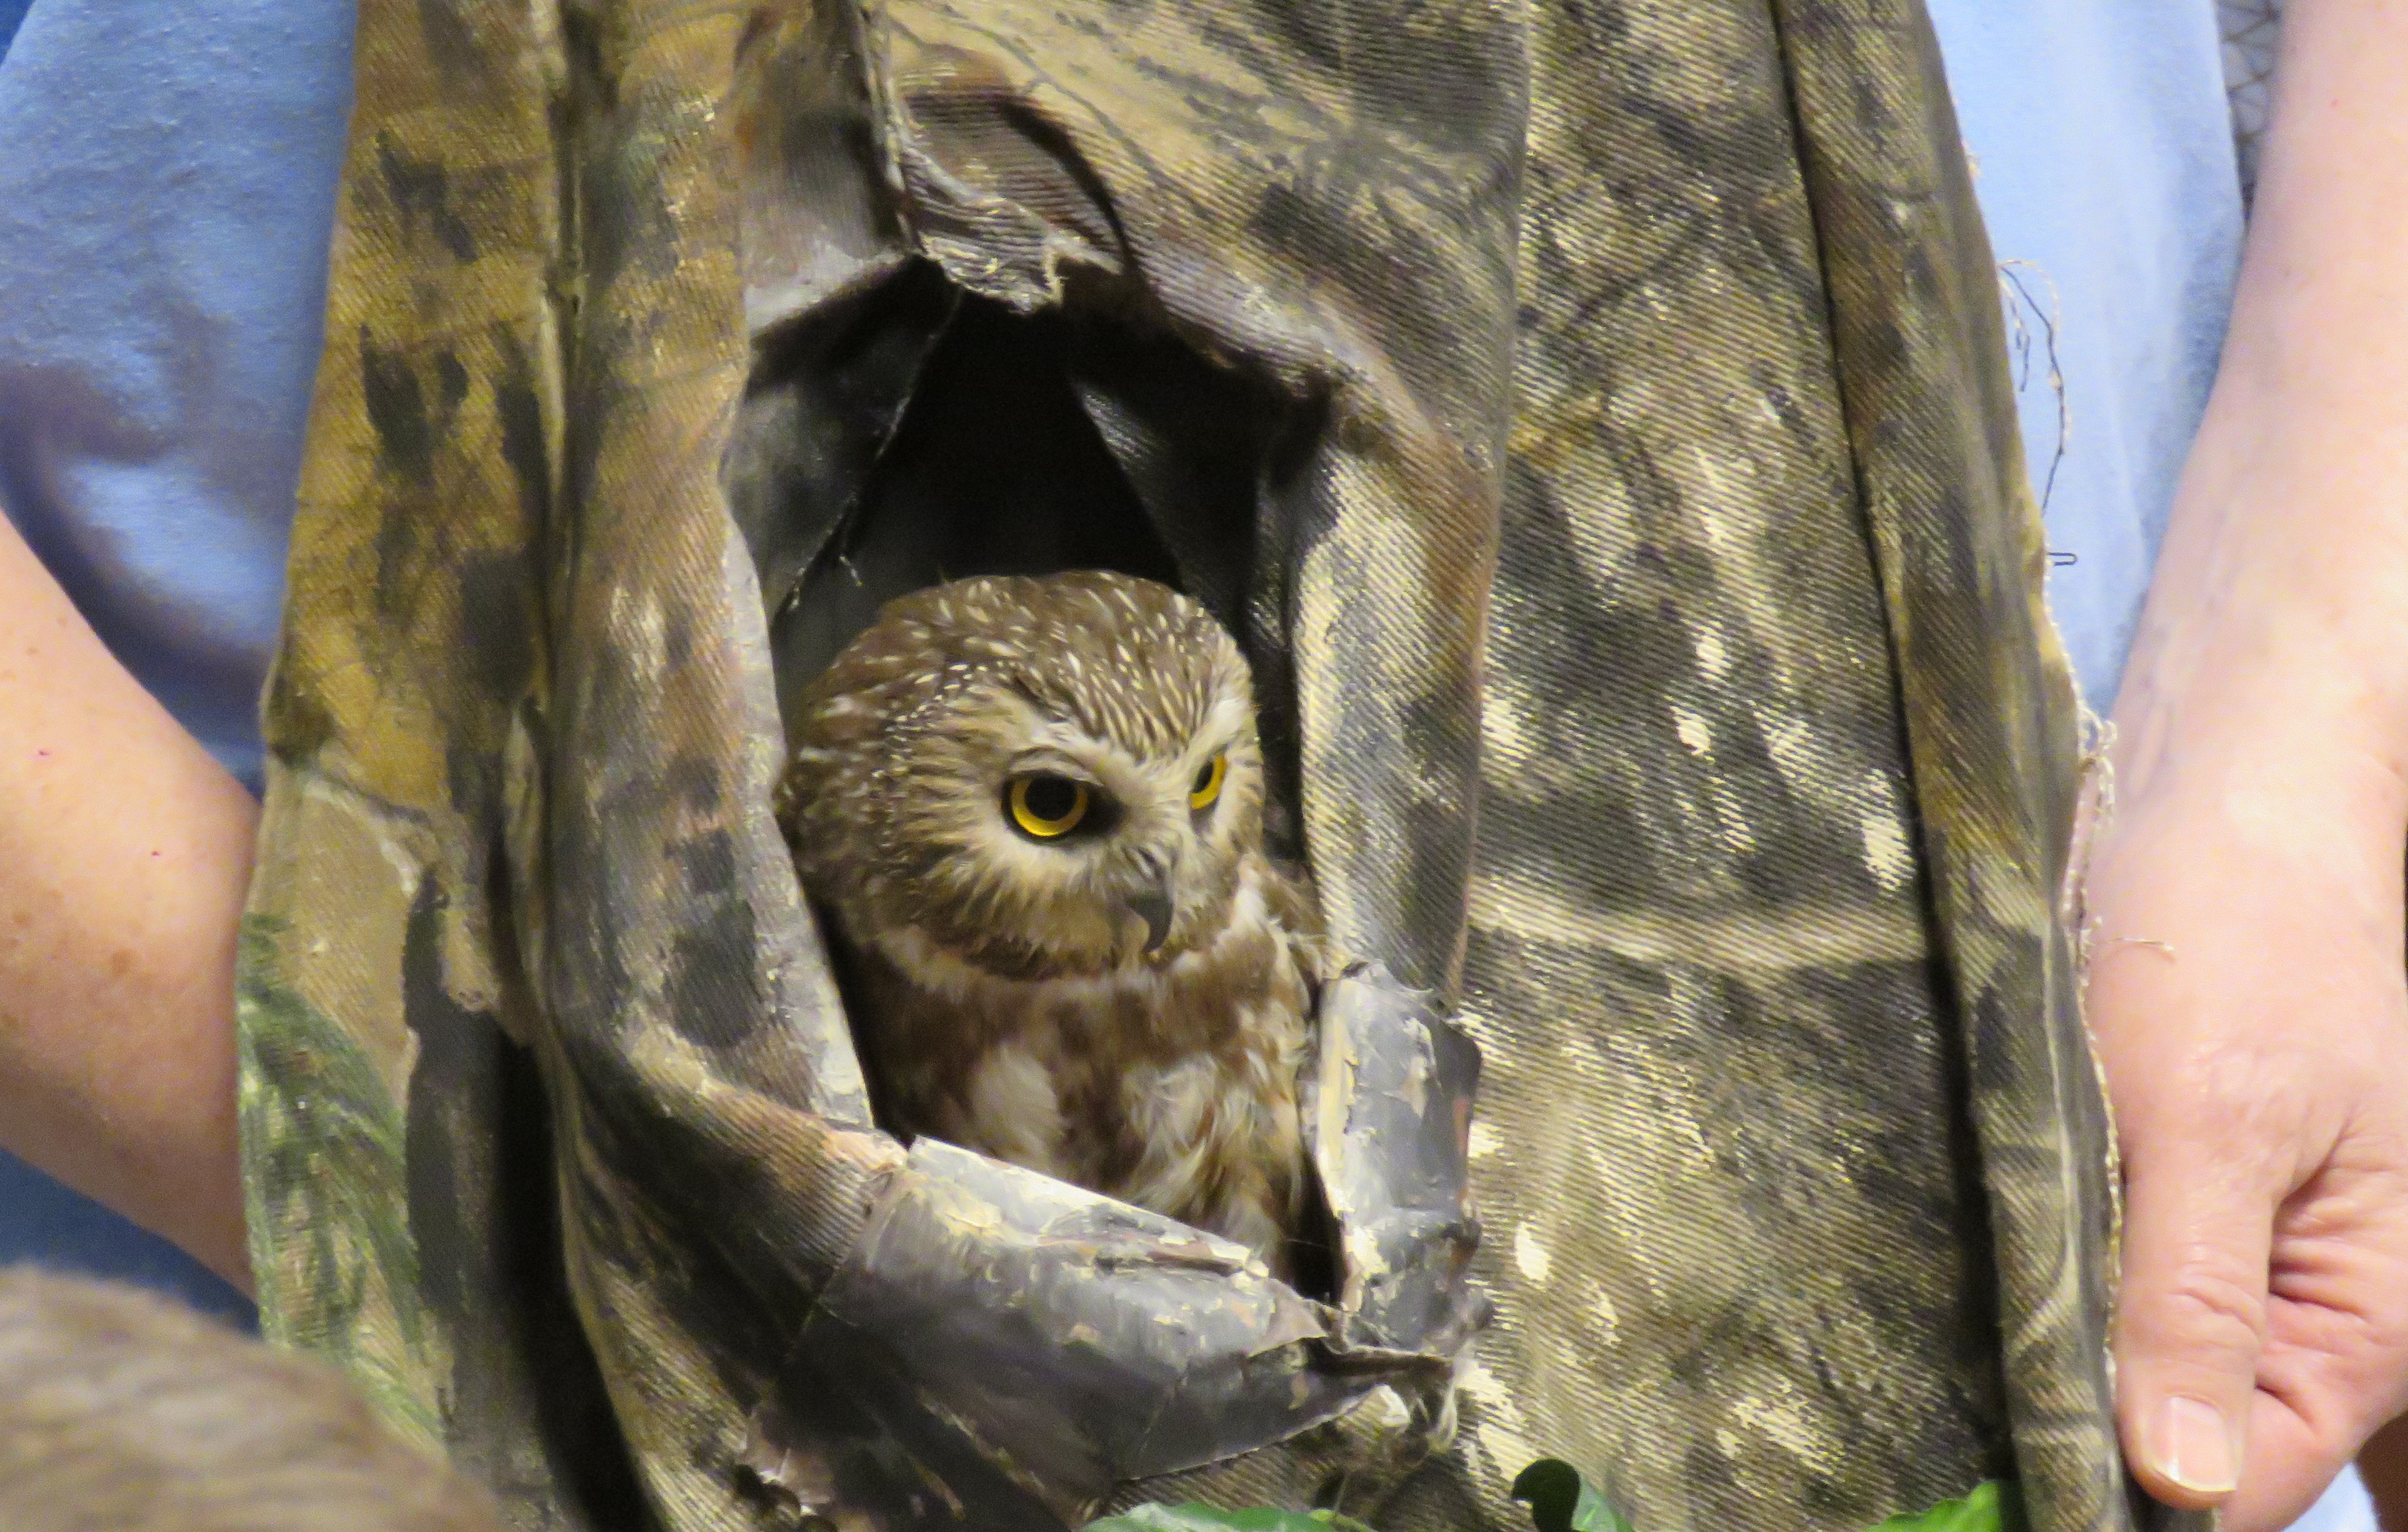 A close-up photo of a Northern Saw-whet Owl looking out of its portable, camouflage nest.